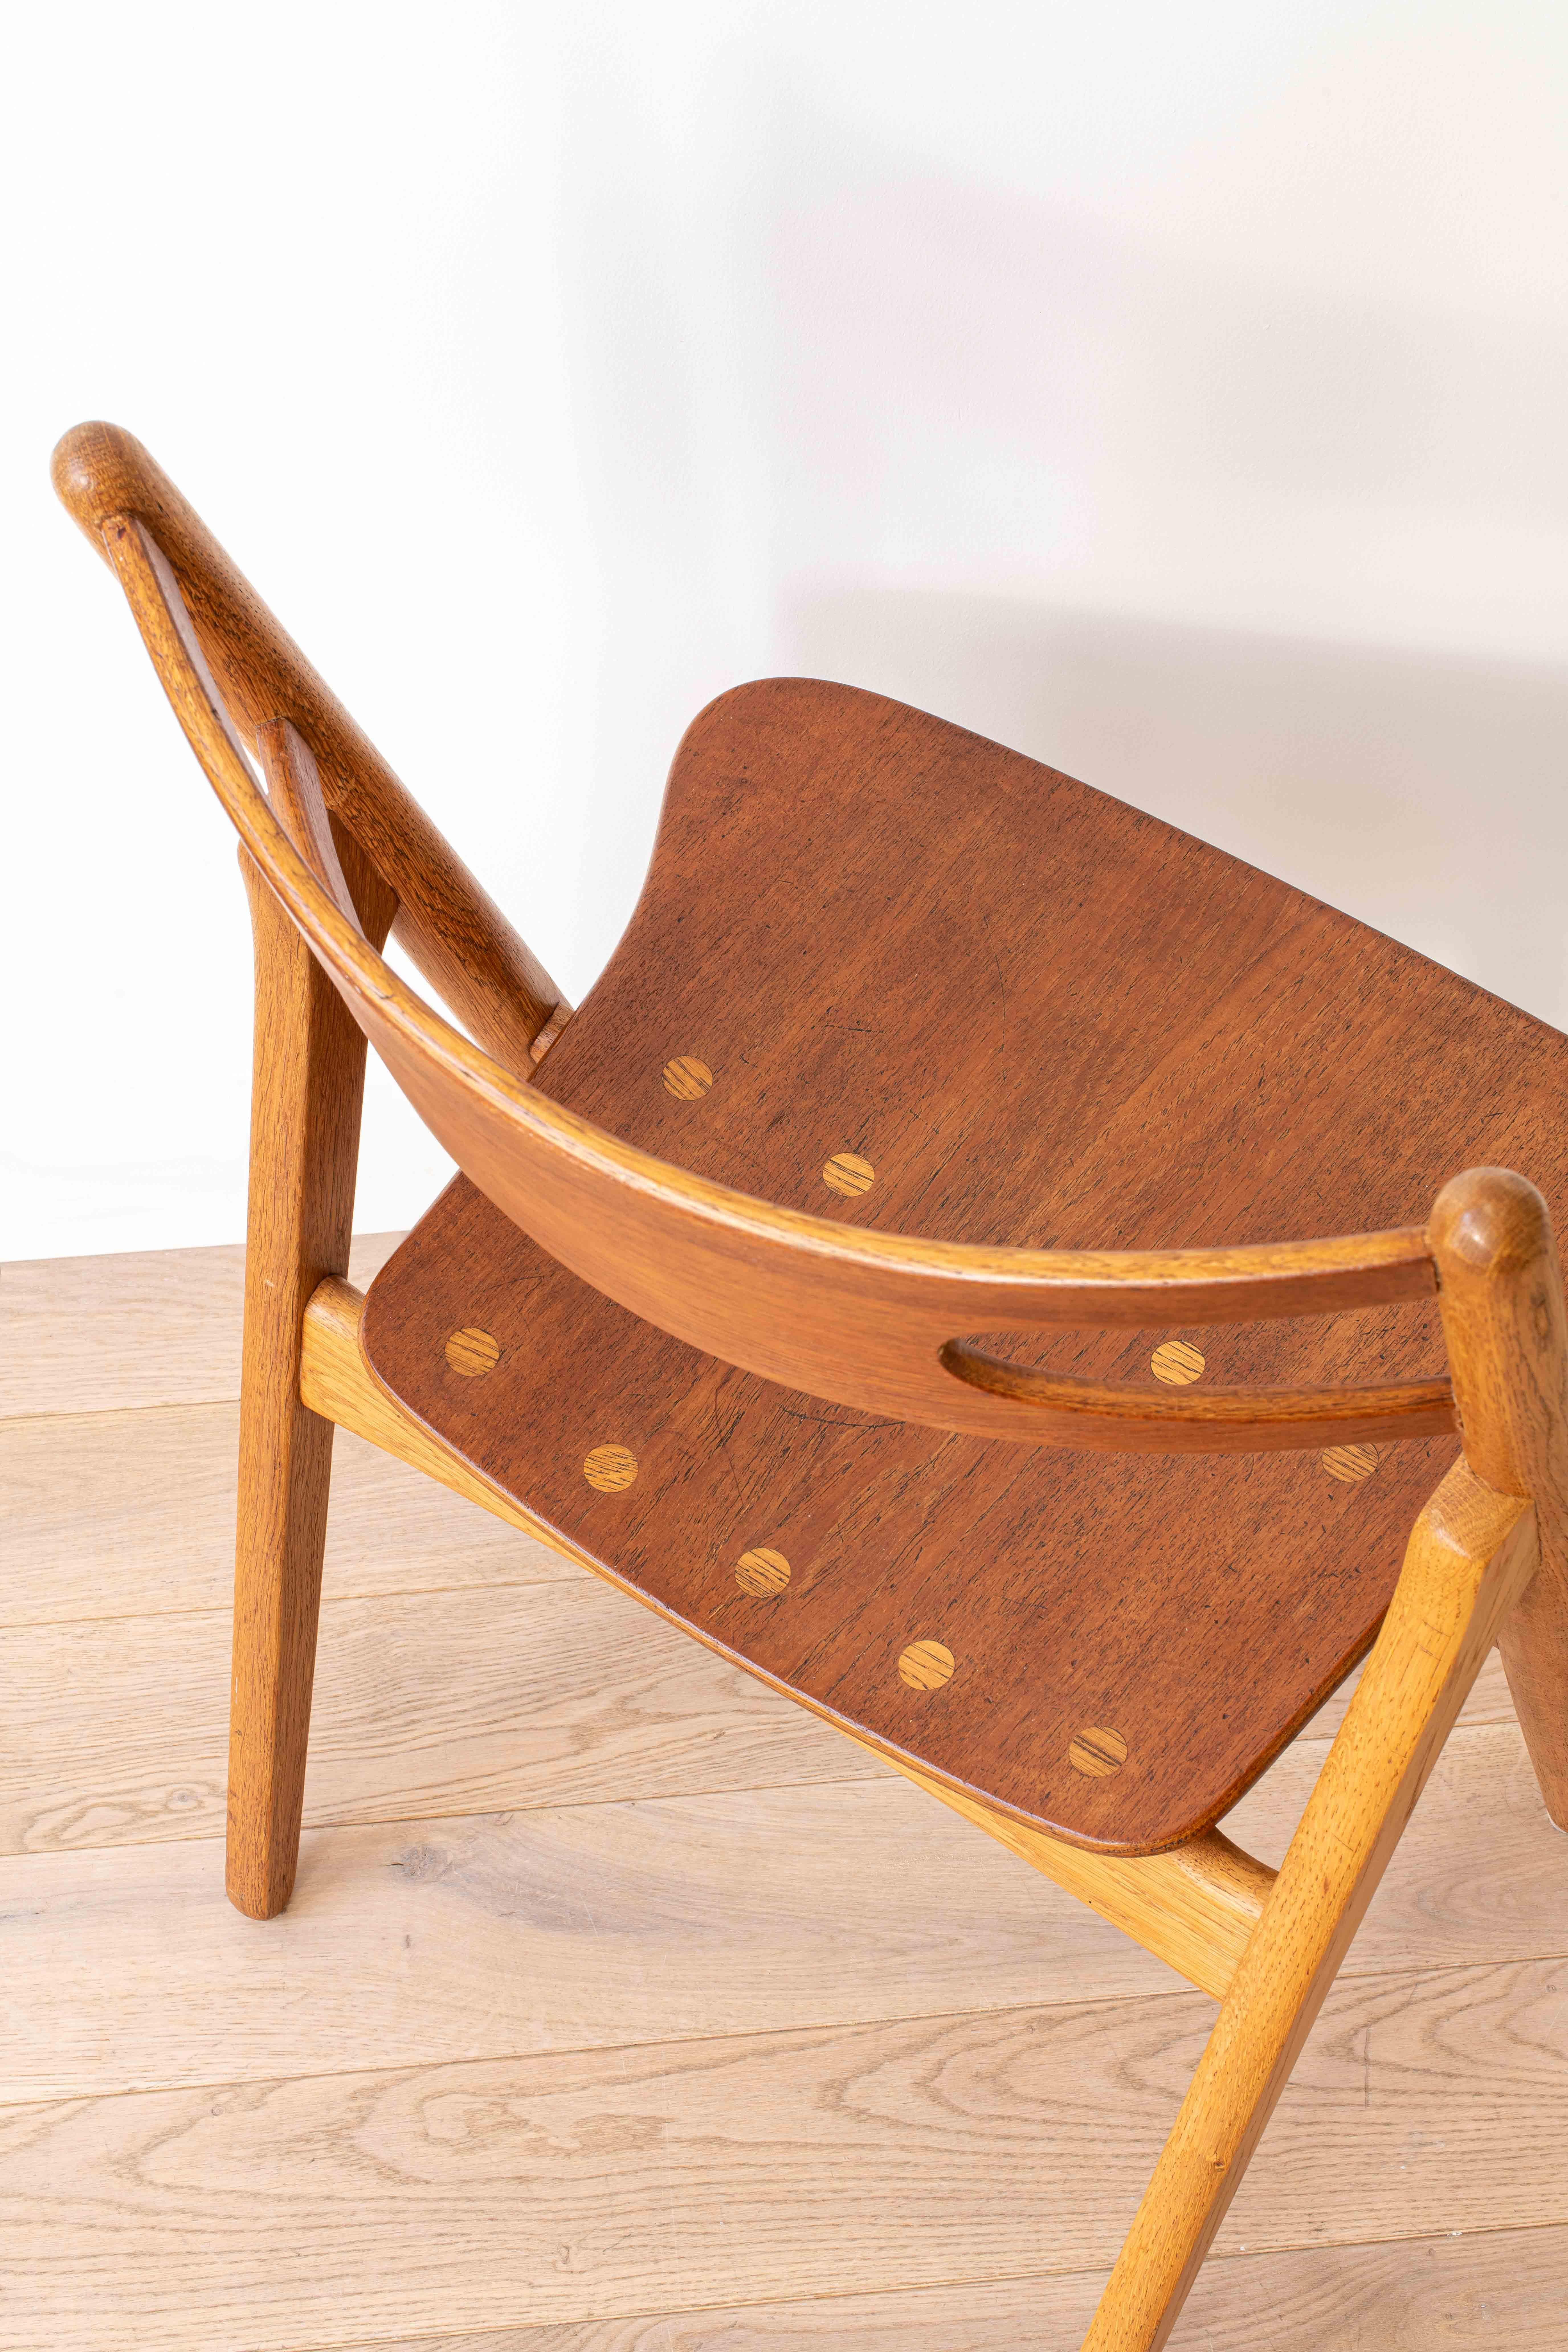 Danish pair of “Sawbuck” CH 29 chairs by Hans J. Wegner For Sale